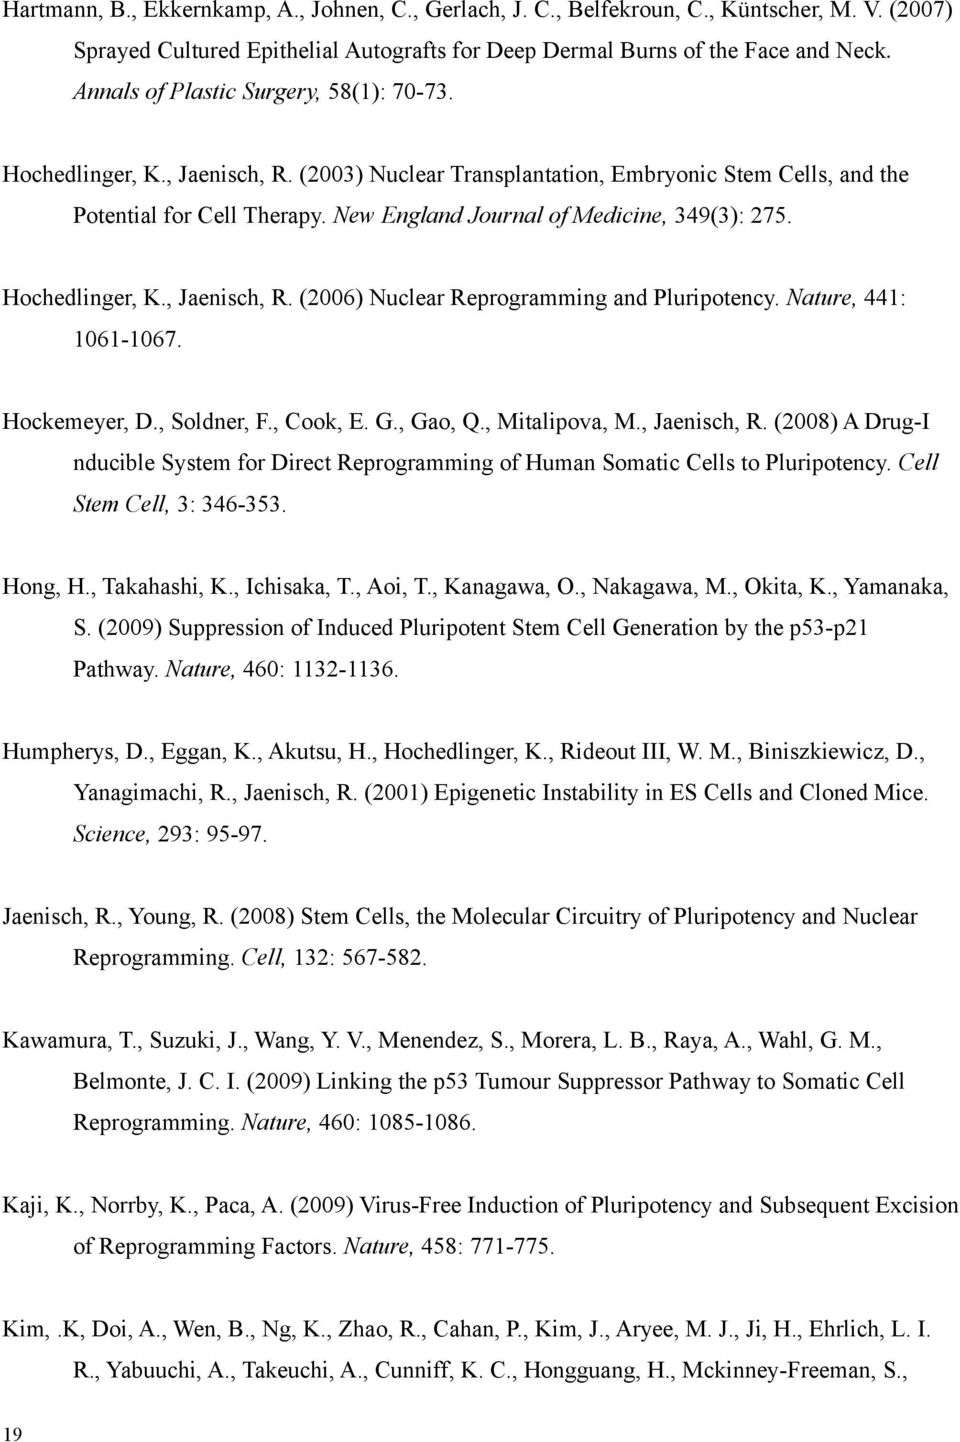 New England Journal of Medicine, 349(3): 275. Hochedlinger, K., Jaenisch, R. (2006) Nuclear Reprogramming and Pluripotency. Nature, 441: 1061-1067. Hockemeyer, D., Soldner, F., Cook, E. G., Gao, Q.